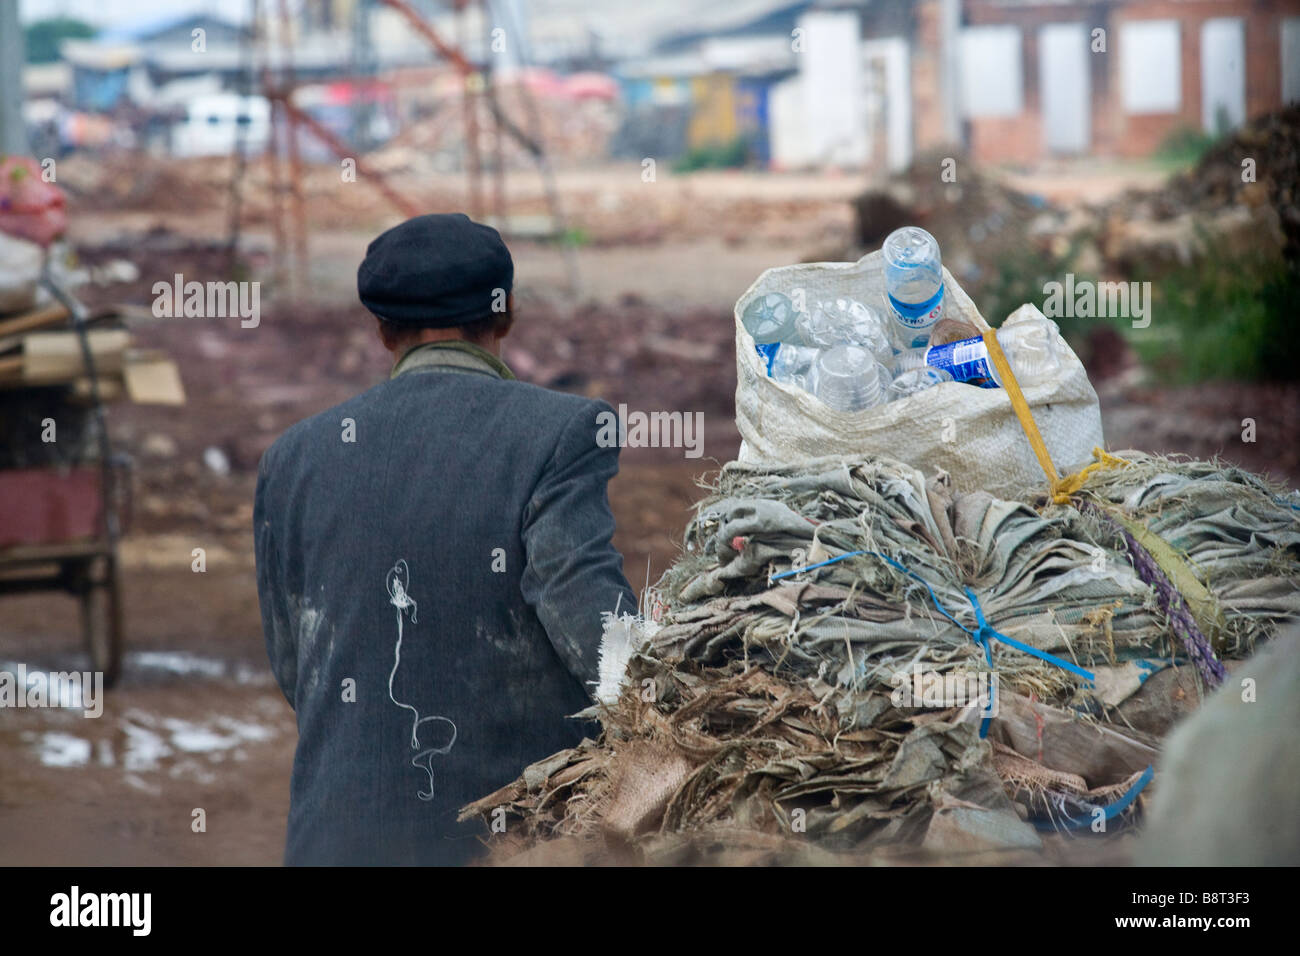 A trash collector pulling his cart in the suburbs of Kunming, Yunnan province, China. Stock Photo